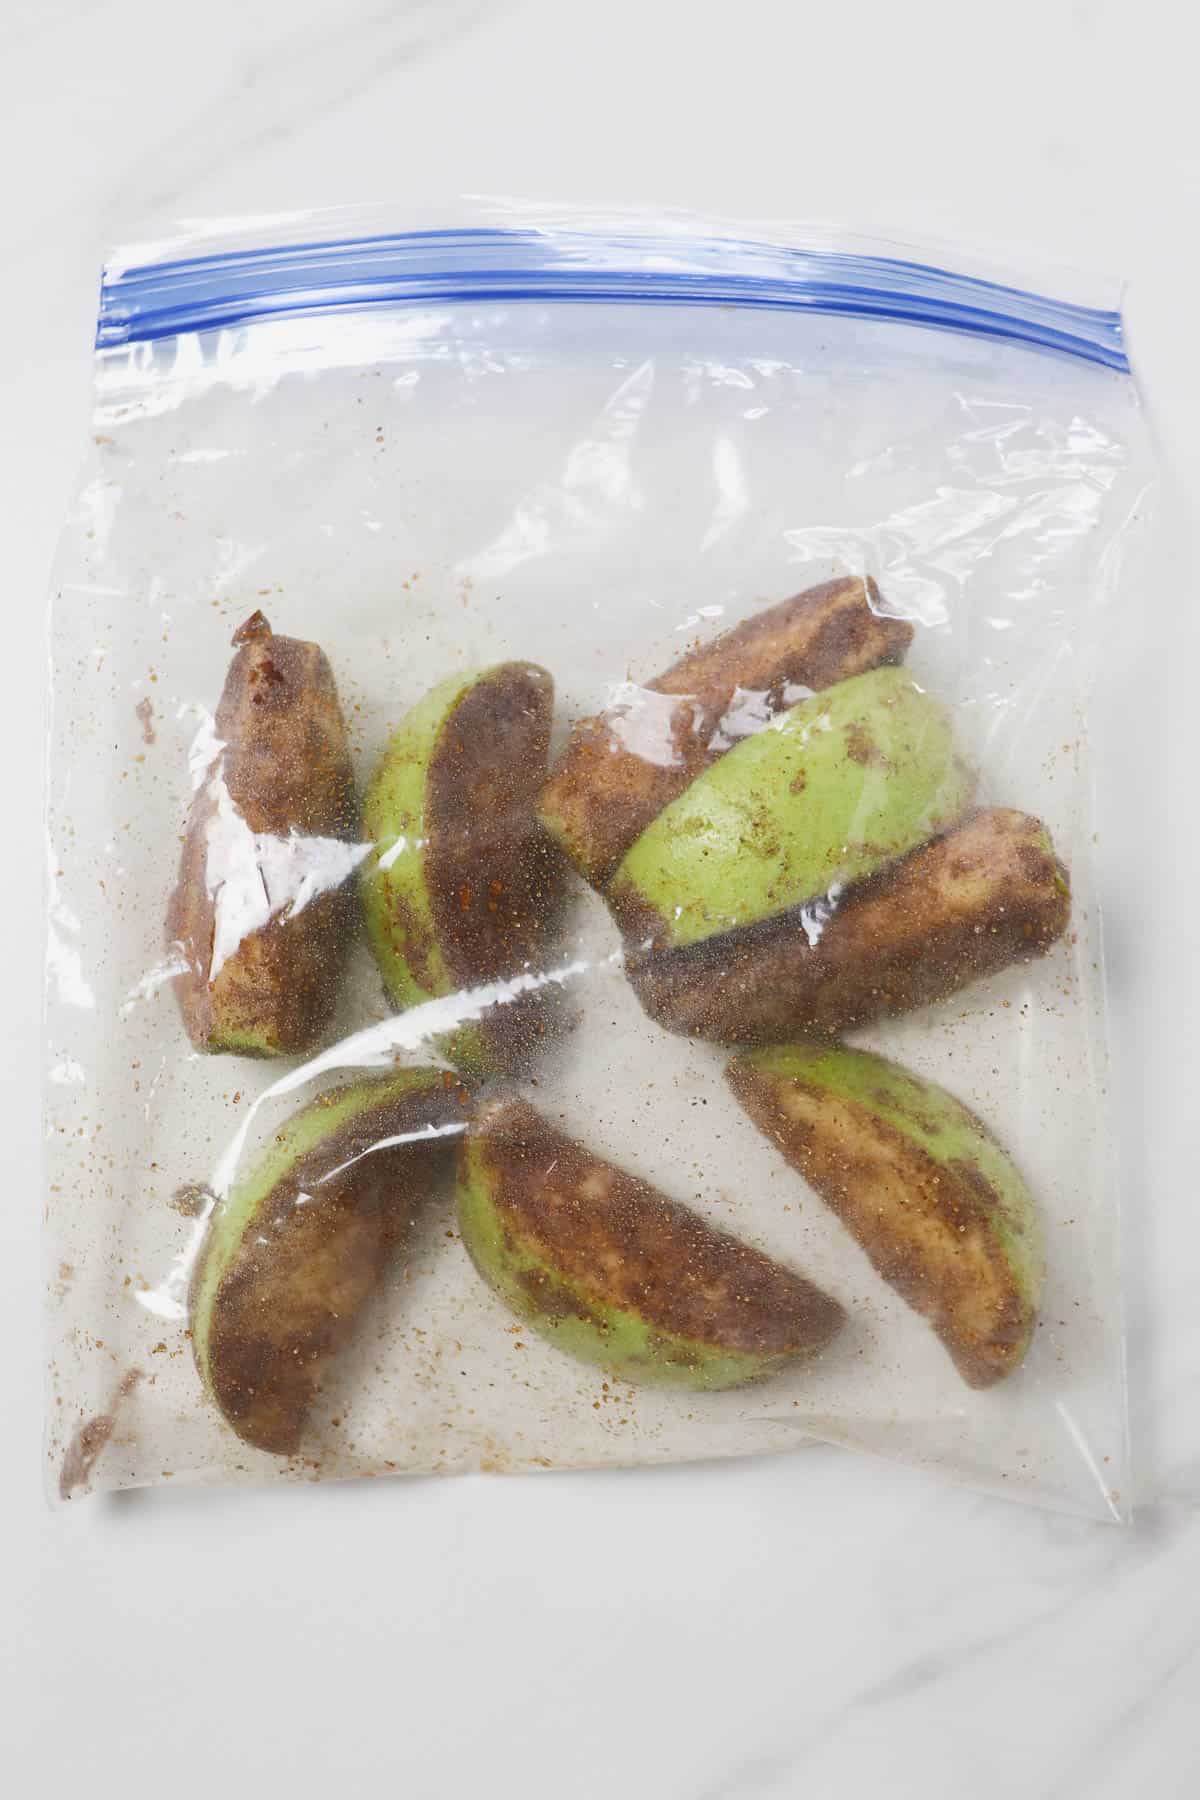 shaking the apple slices in a plastic bag to coat with cinnamon and sugar